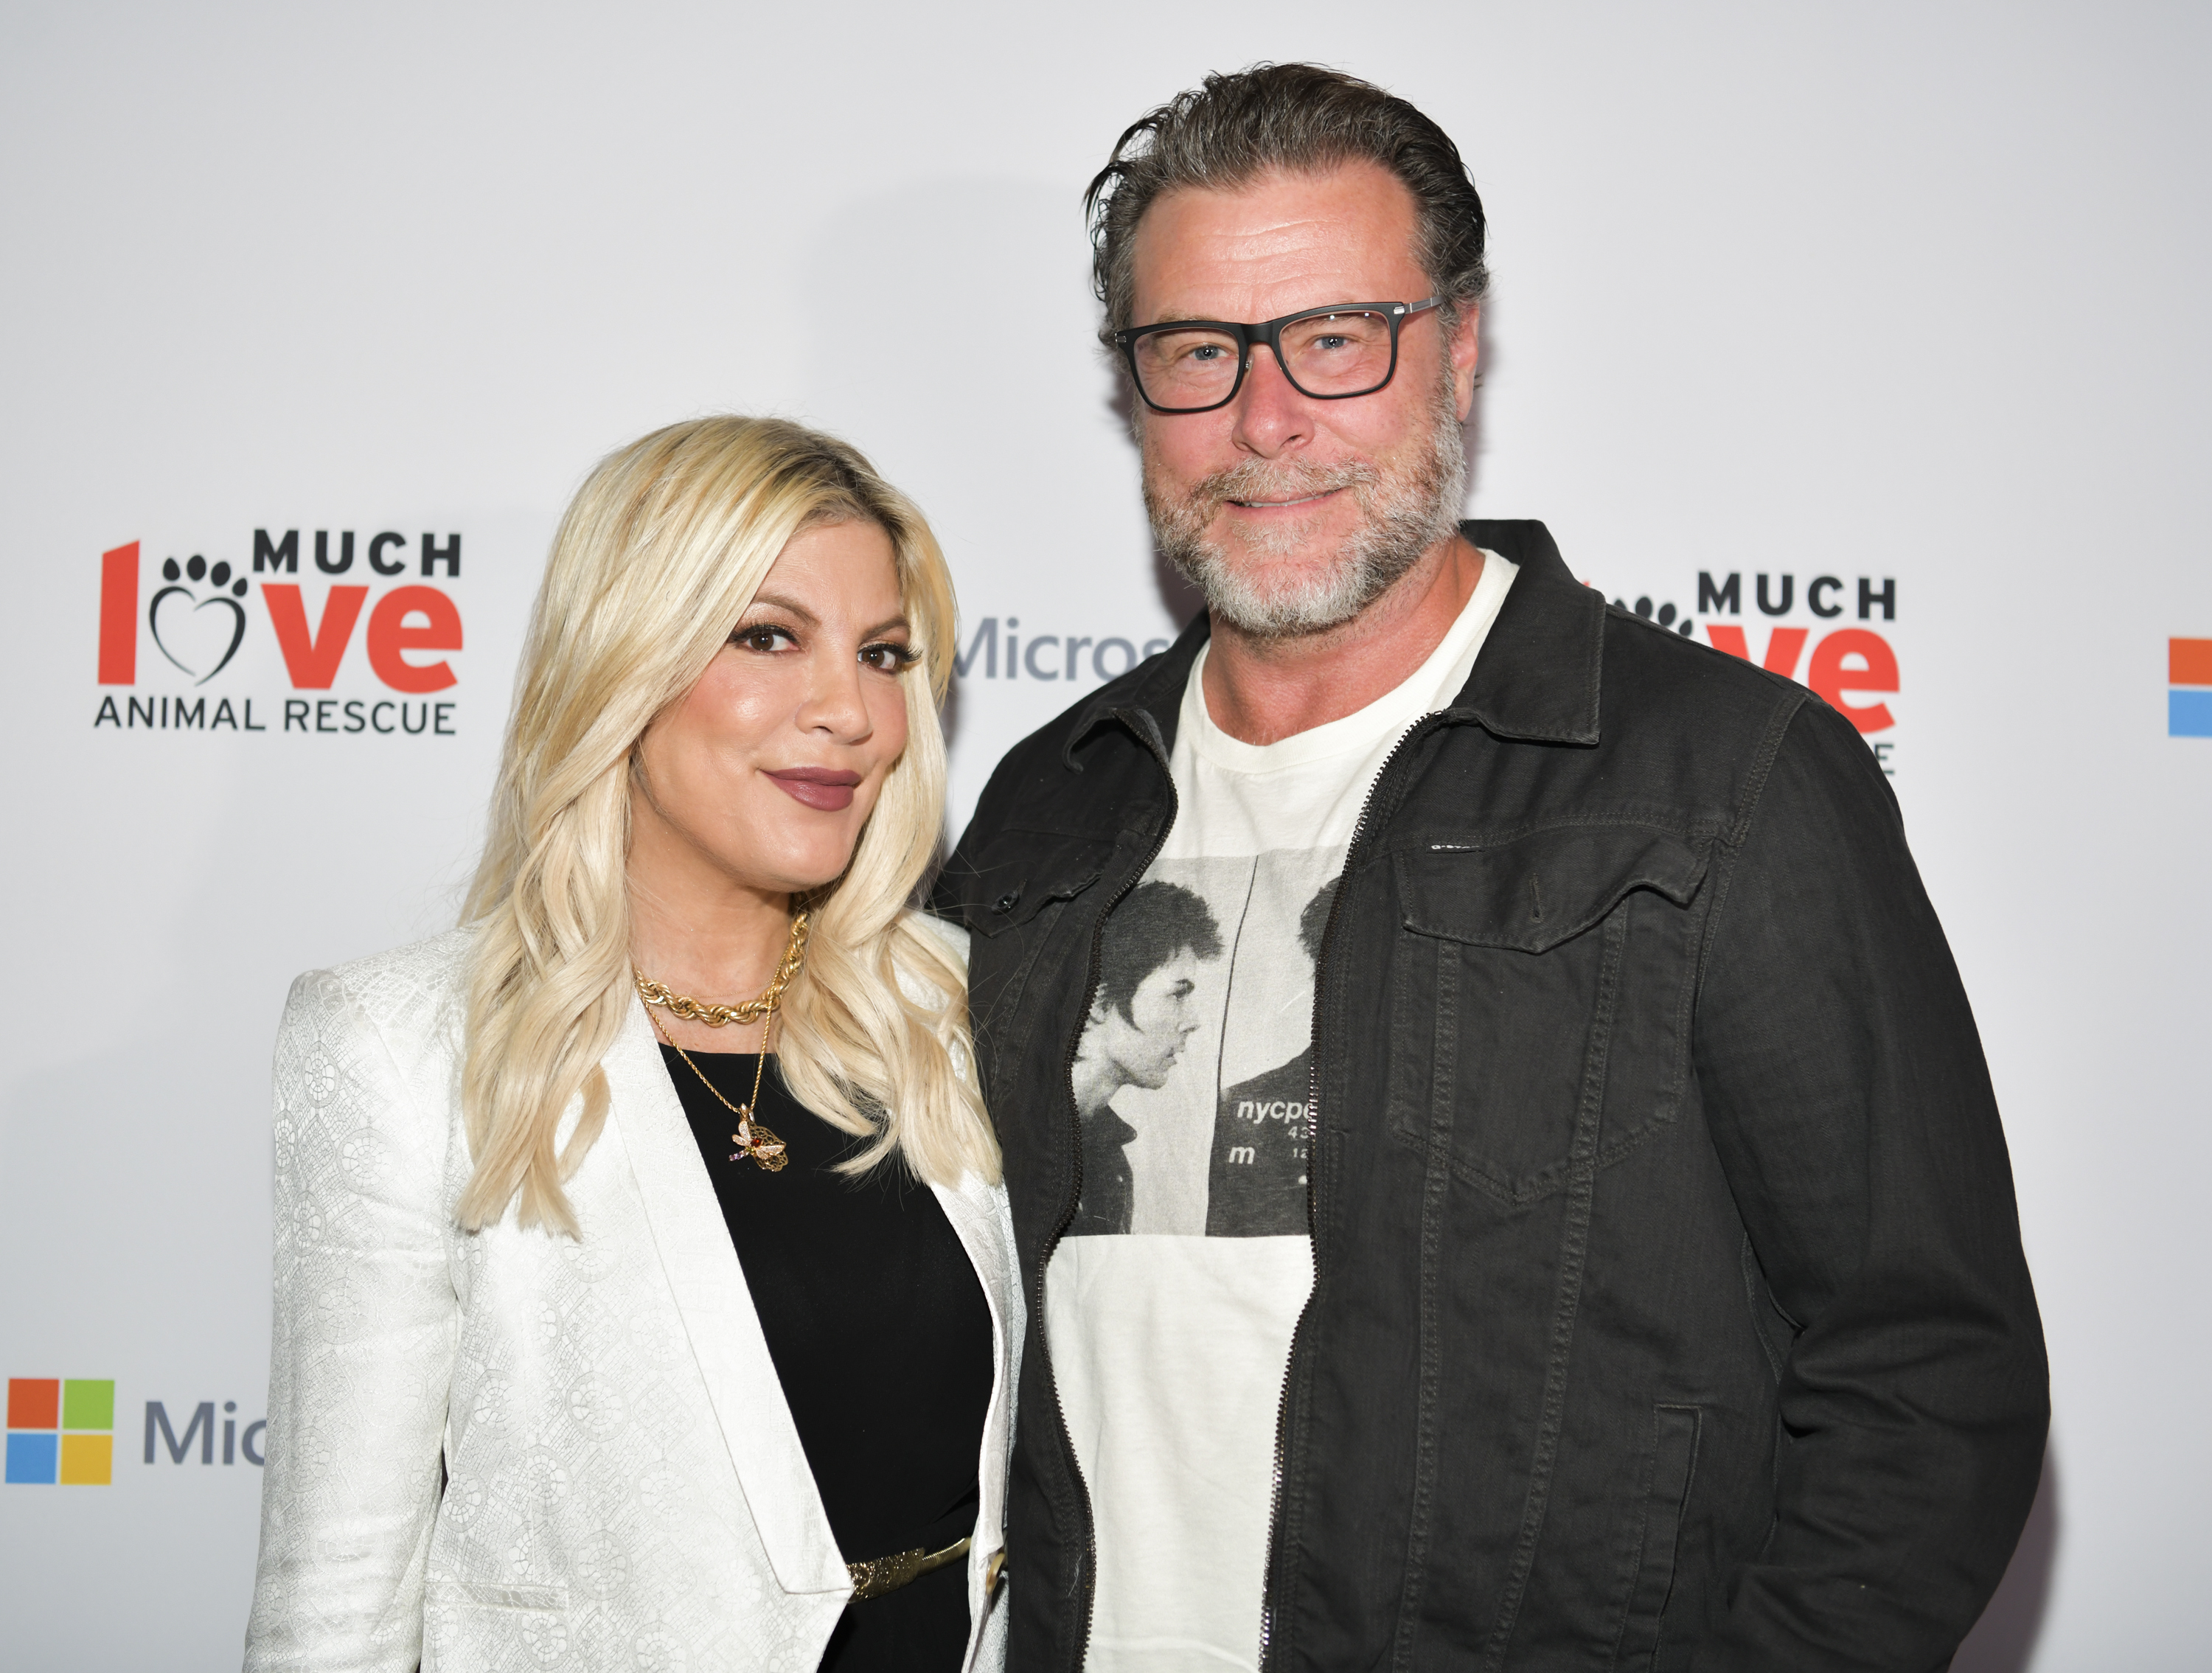 Tori Spelling and Dean McDermott at the Much Love Animal Rescue 3rd Annual Spoken Woof Benefit in Culver City, California on October 17, 2019 | Source: Getty Images